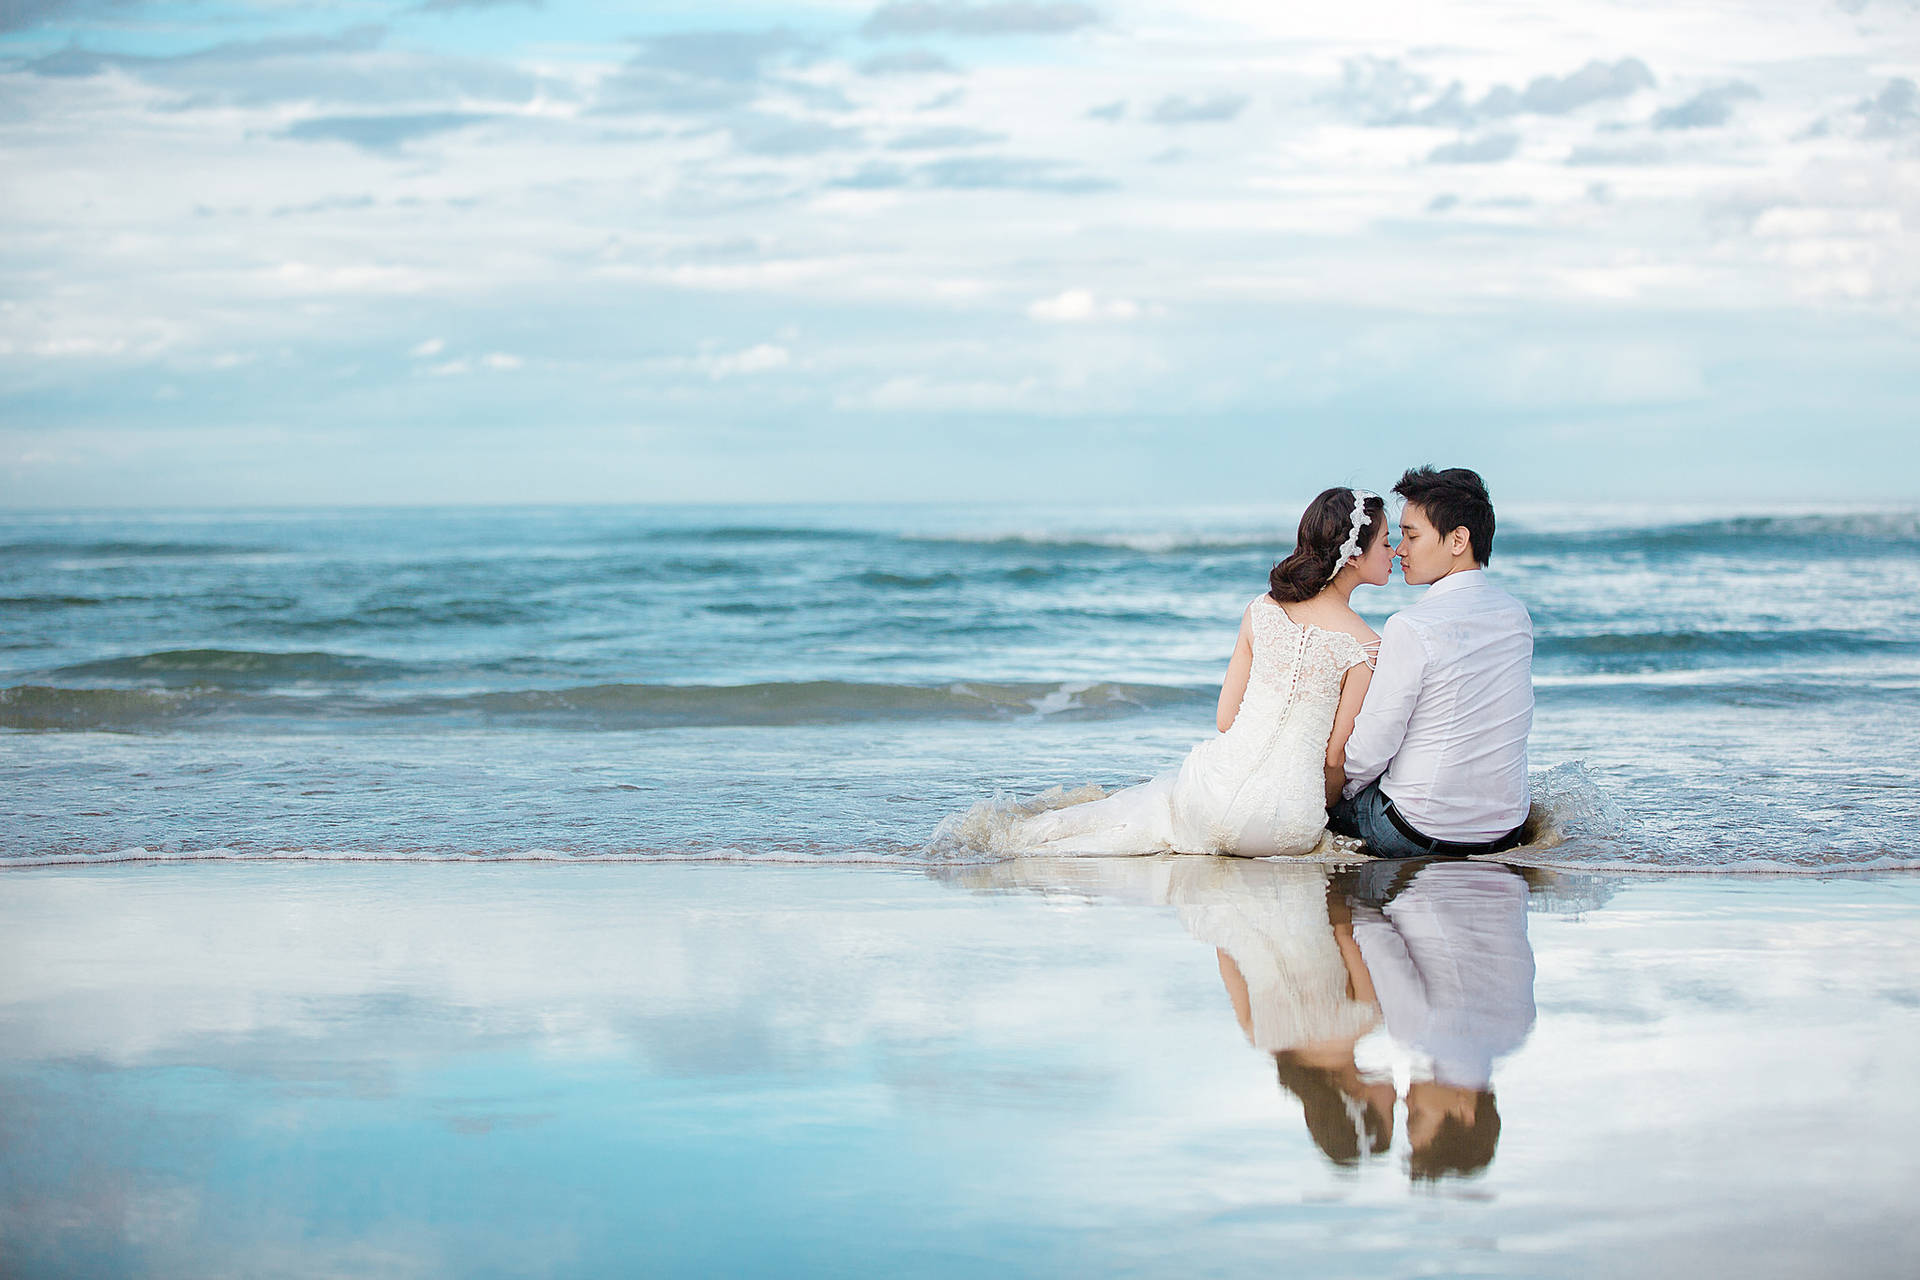 Groom And Bride In Beach Background